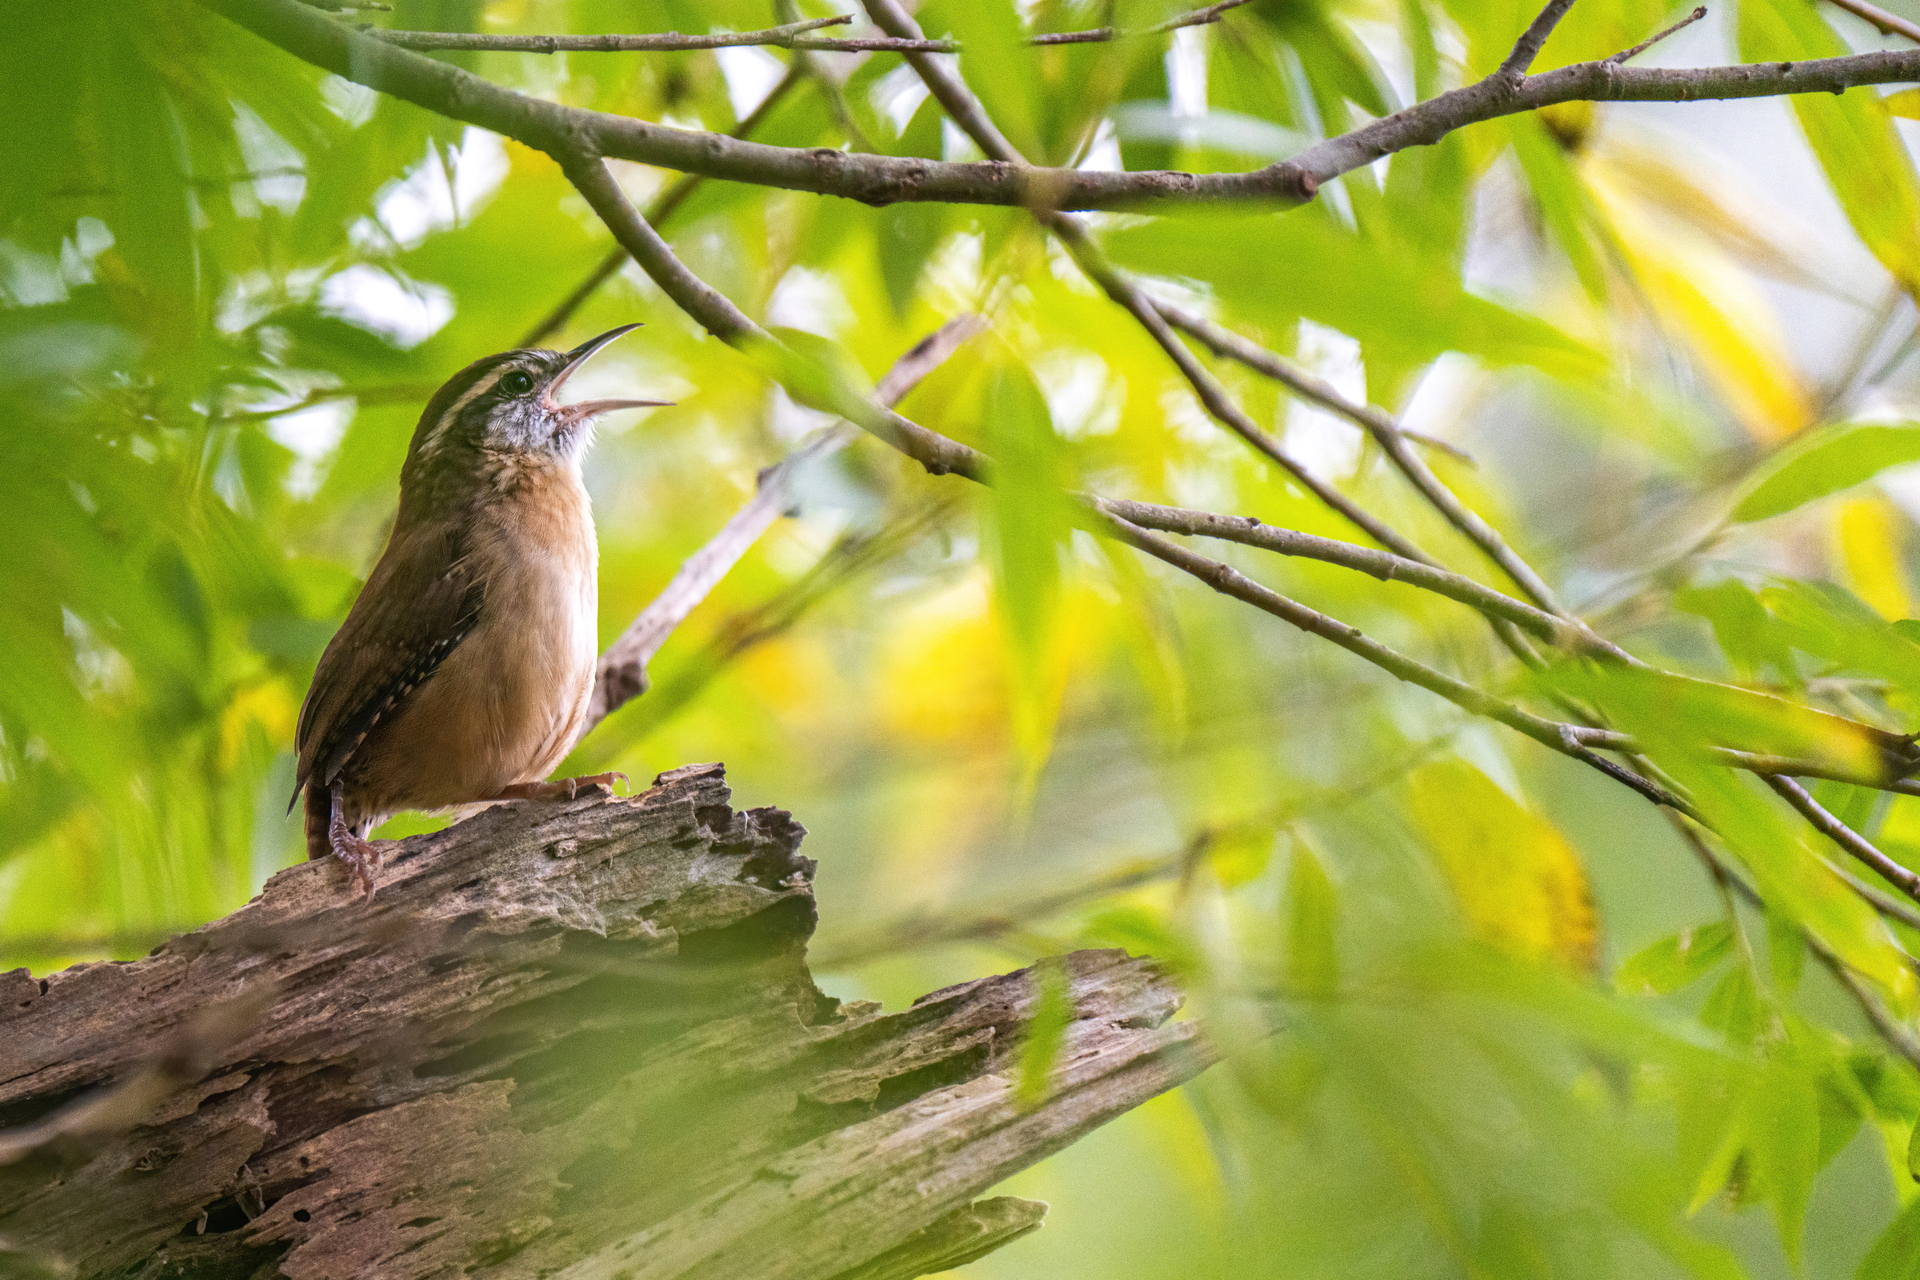 Carolina Wren calling out within a green branches